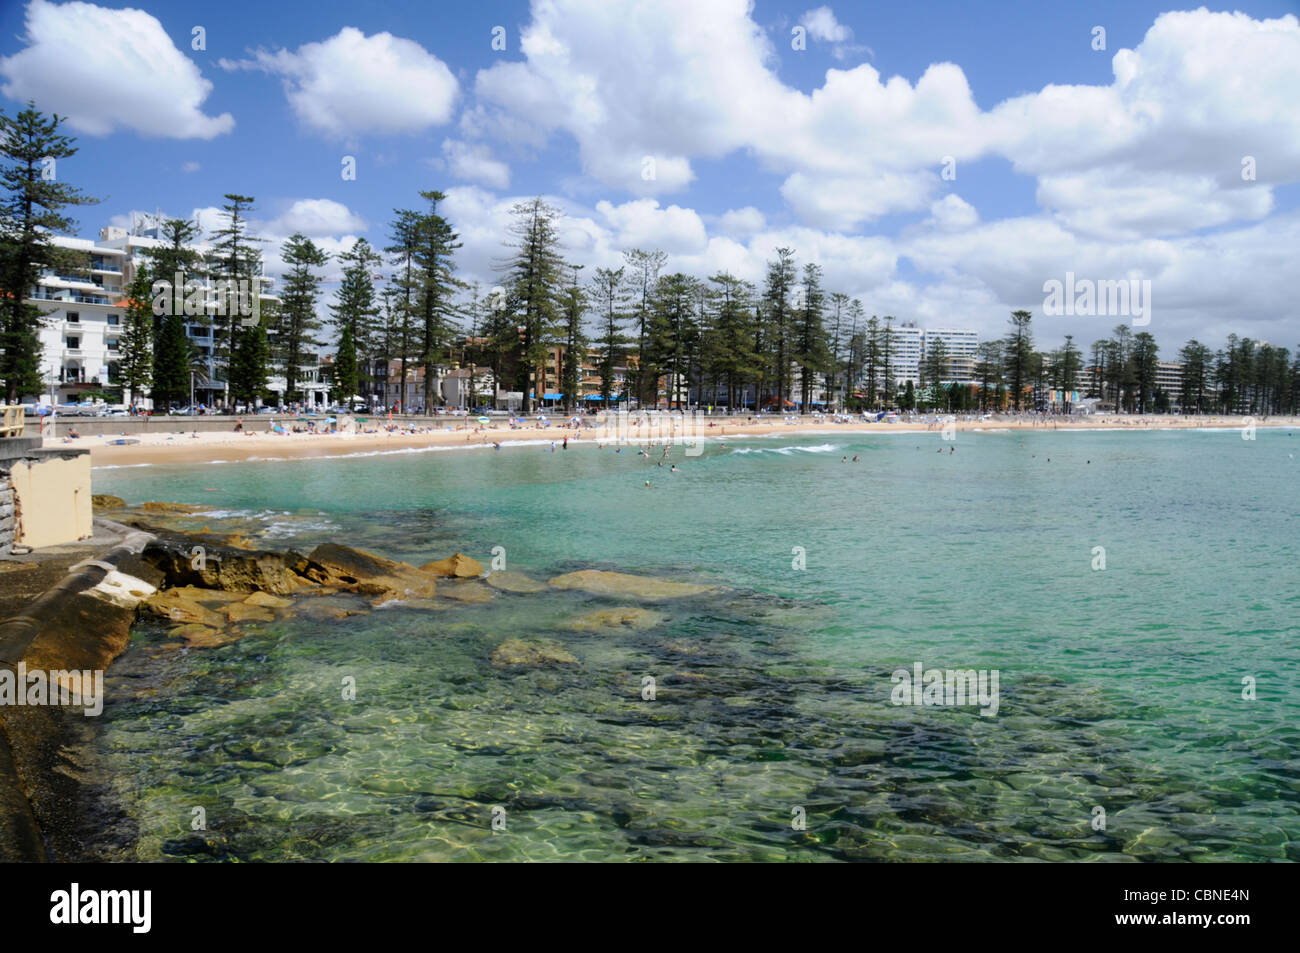 Manly Beach facing the Pacific Ocean near Sydney in New South Wales, Australia. Stock Photo